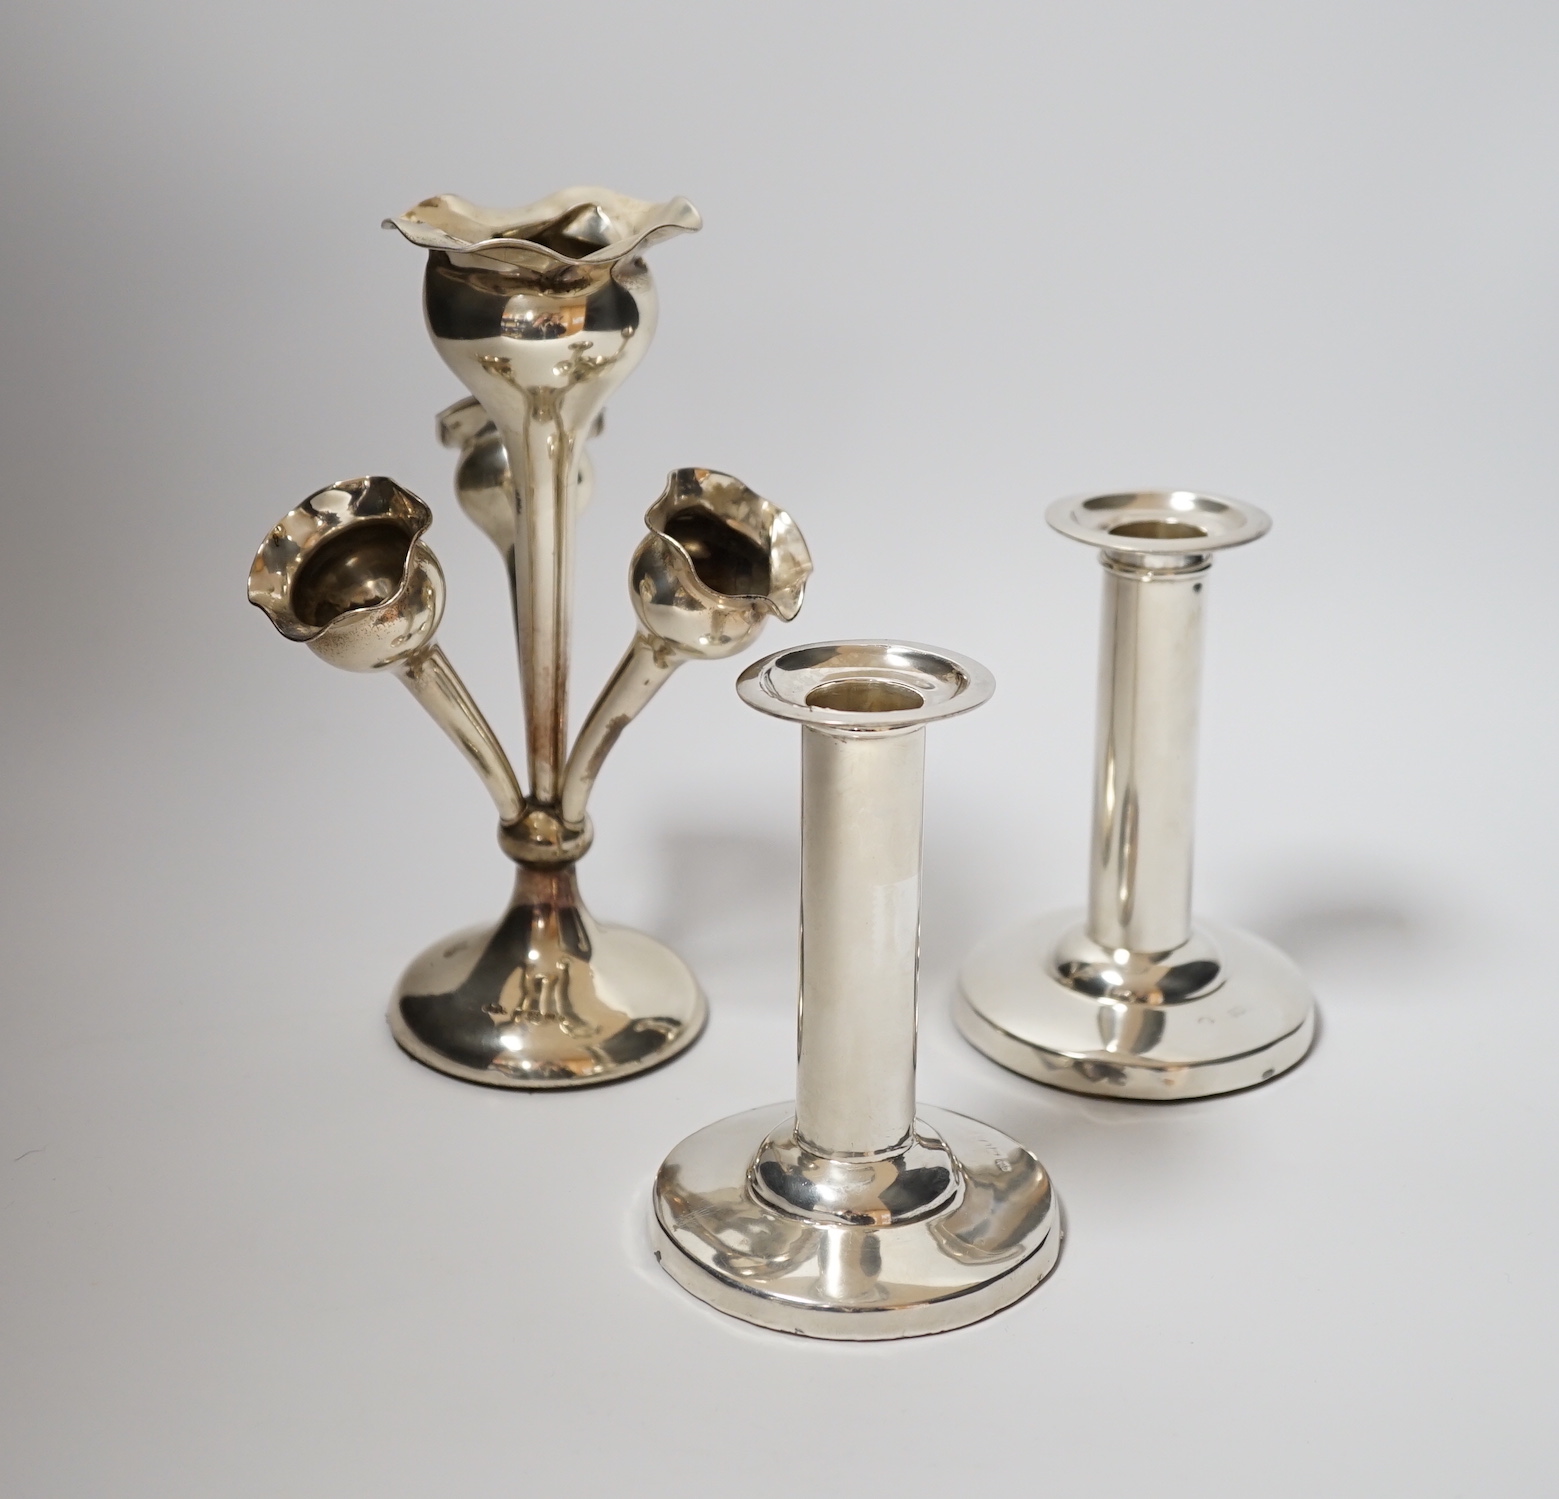 A pair of Edwardian silver mounted dwarf candlesticks, by William Hutton & Sons, London, 1904, 11cm, weighted, together with a late Victorian small silver centrepiece with four receivers.